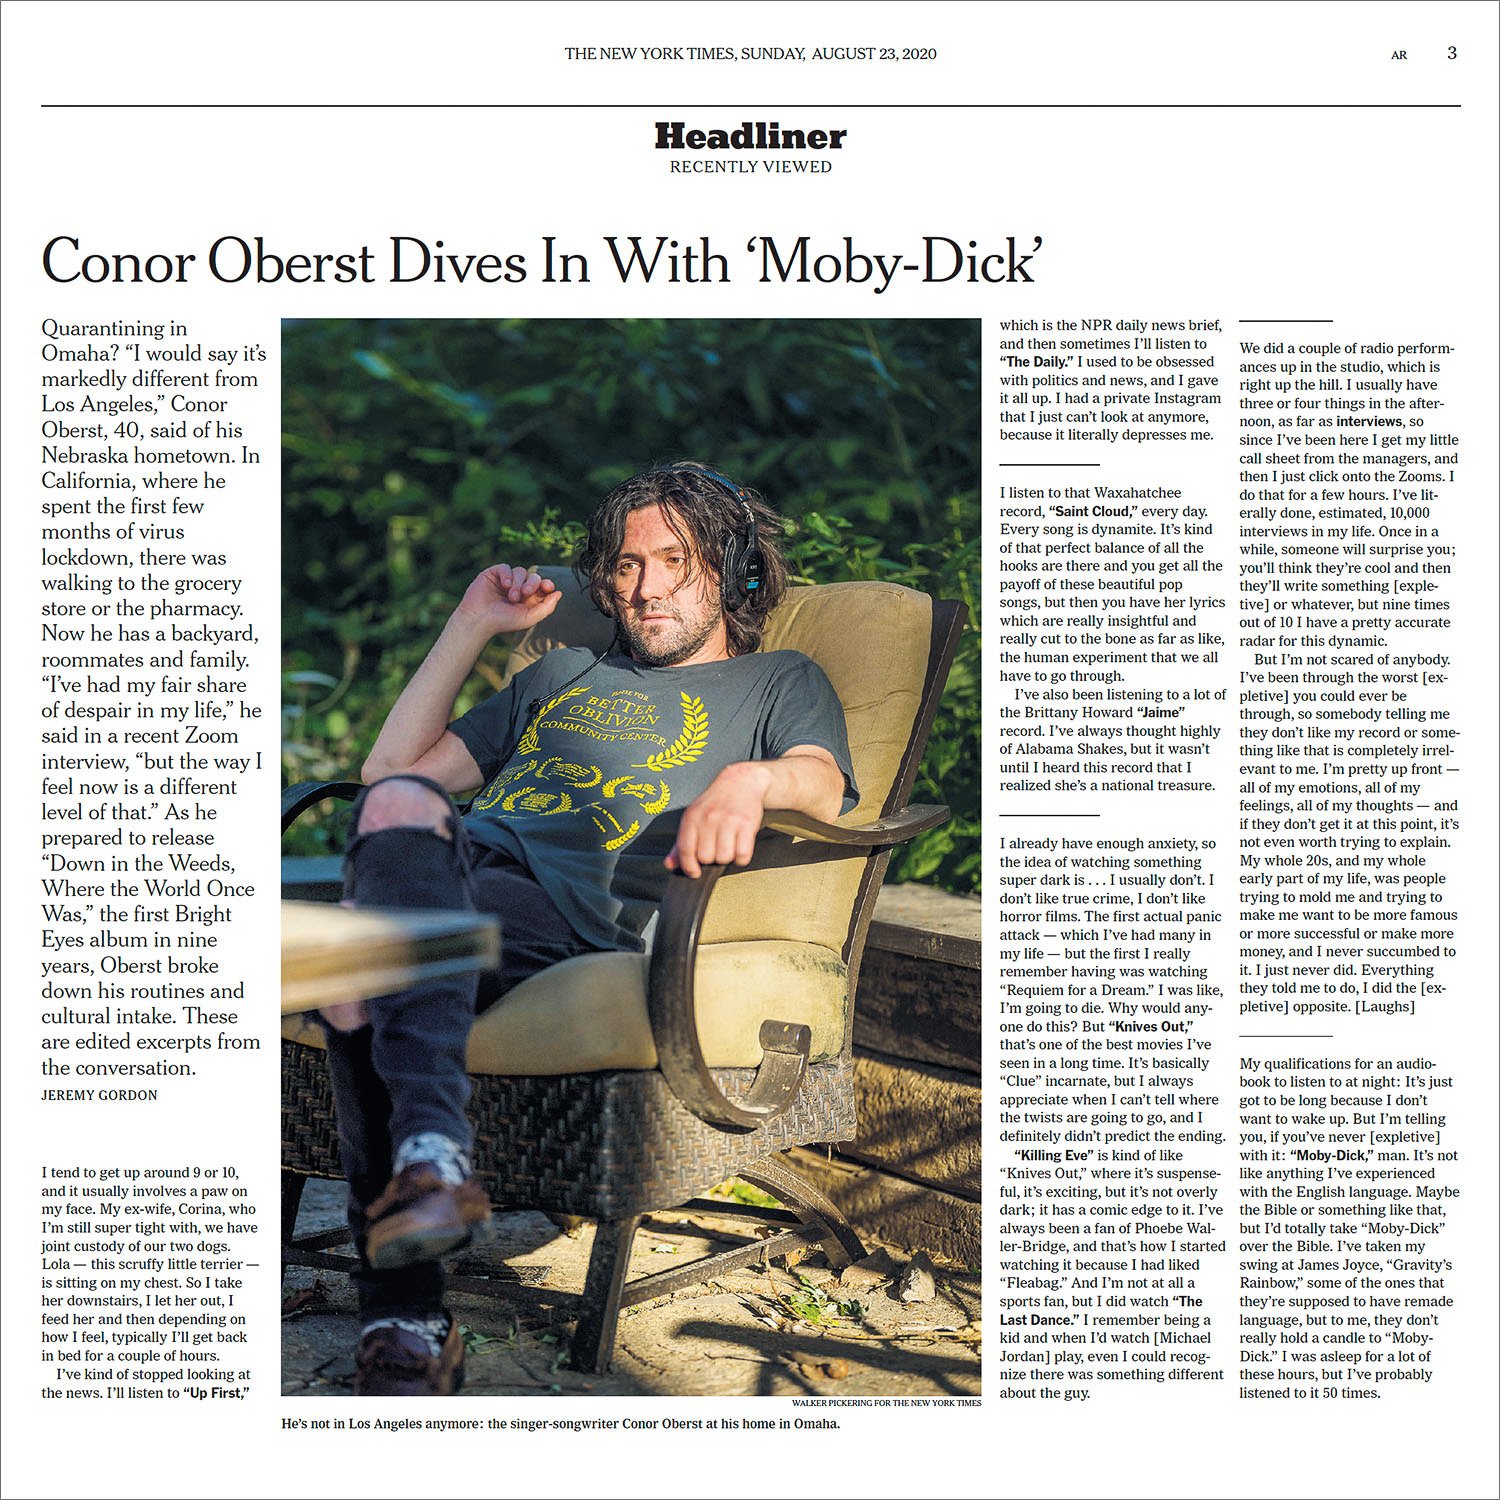  Musician Conor Oberst of Bright Eyes at his home in Omaha, NE, for The New York Times, 2020 